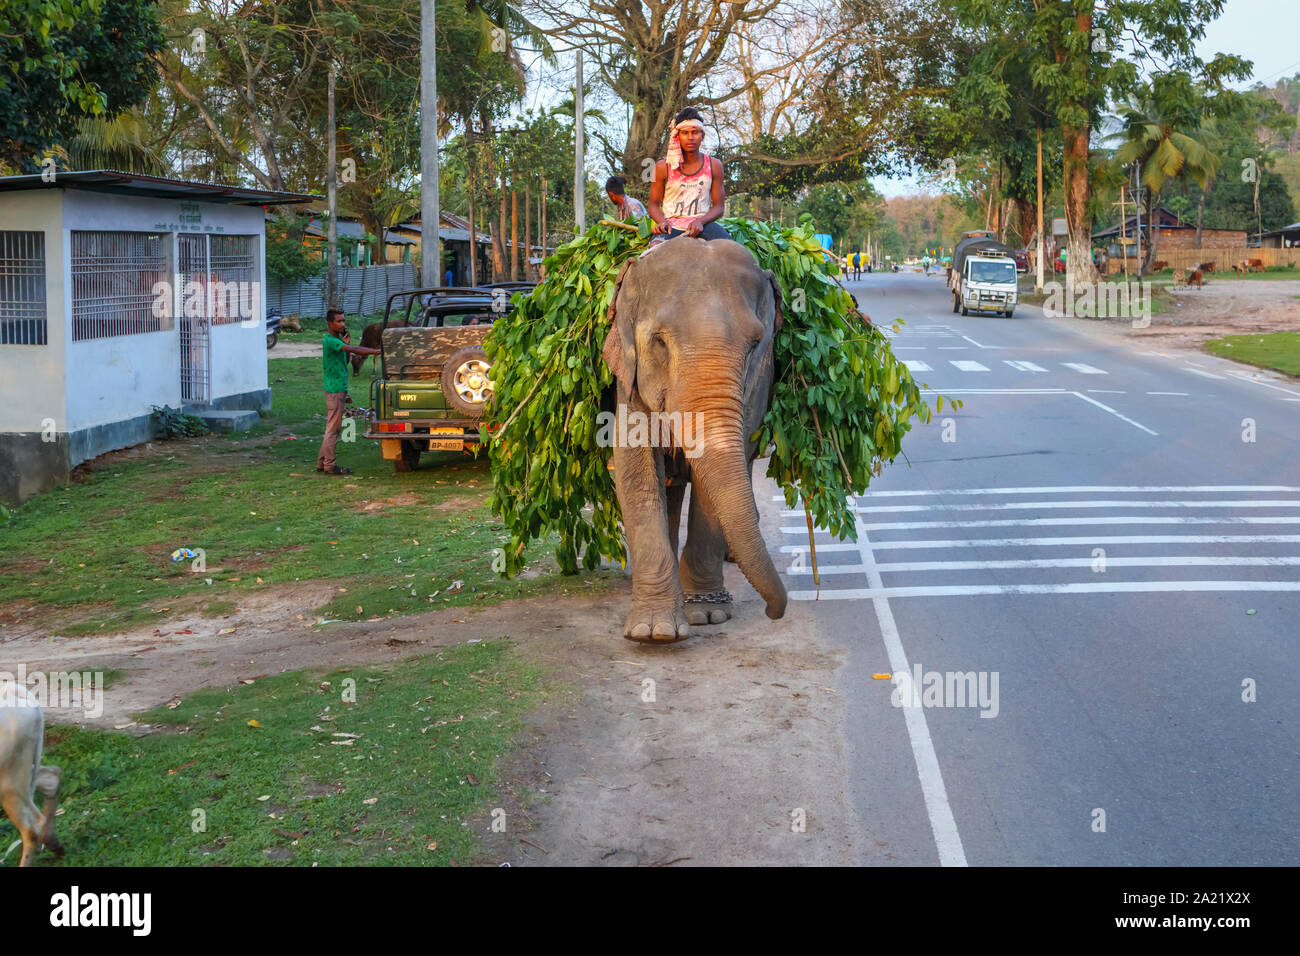 Street scene in Kaziranga, Assam, India: a working Indian Elephant with its mahout walks along a road carrying a load of leafy branches Stock Photo